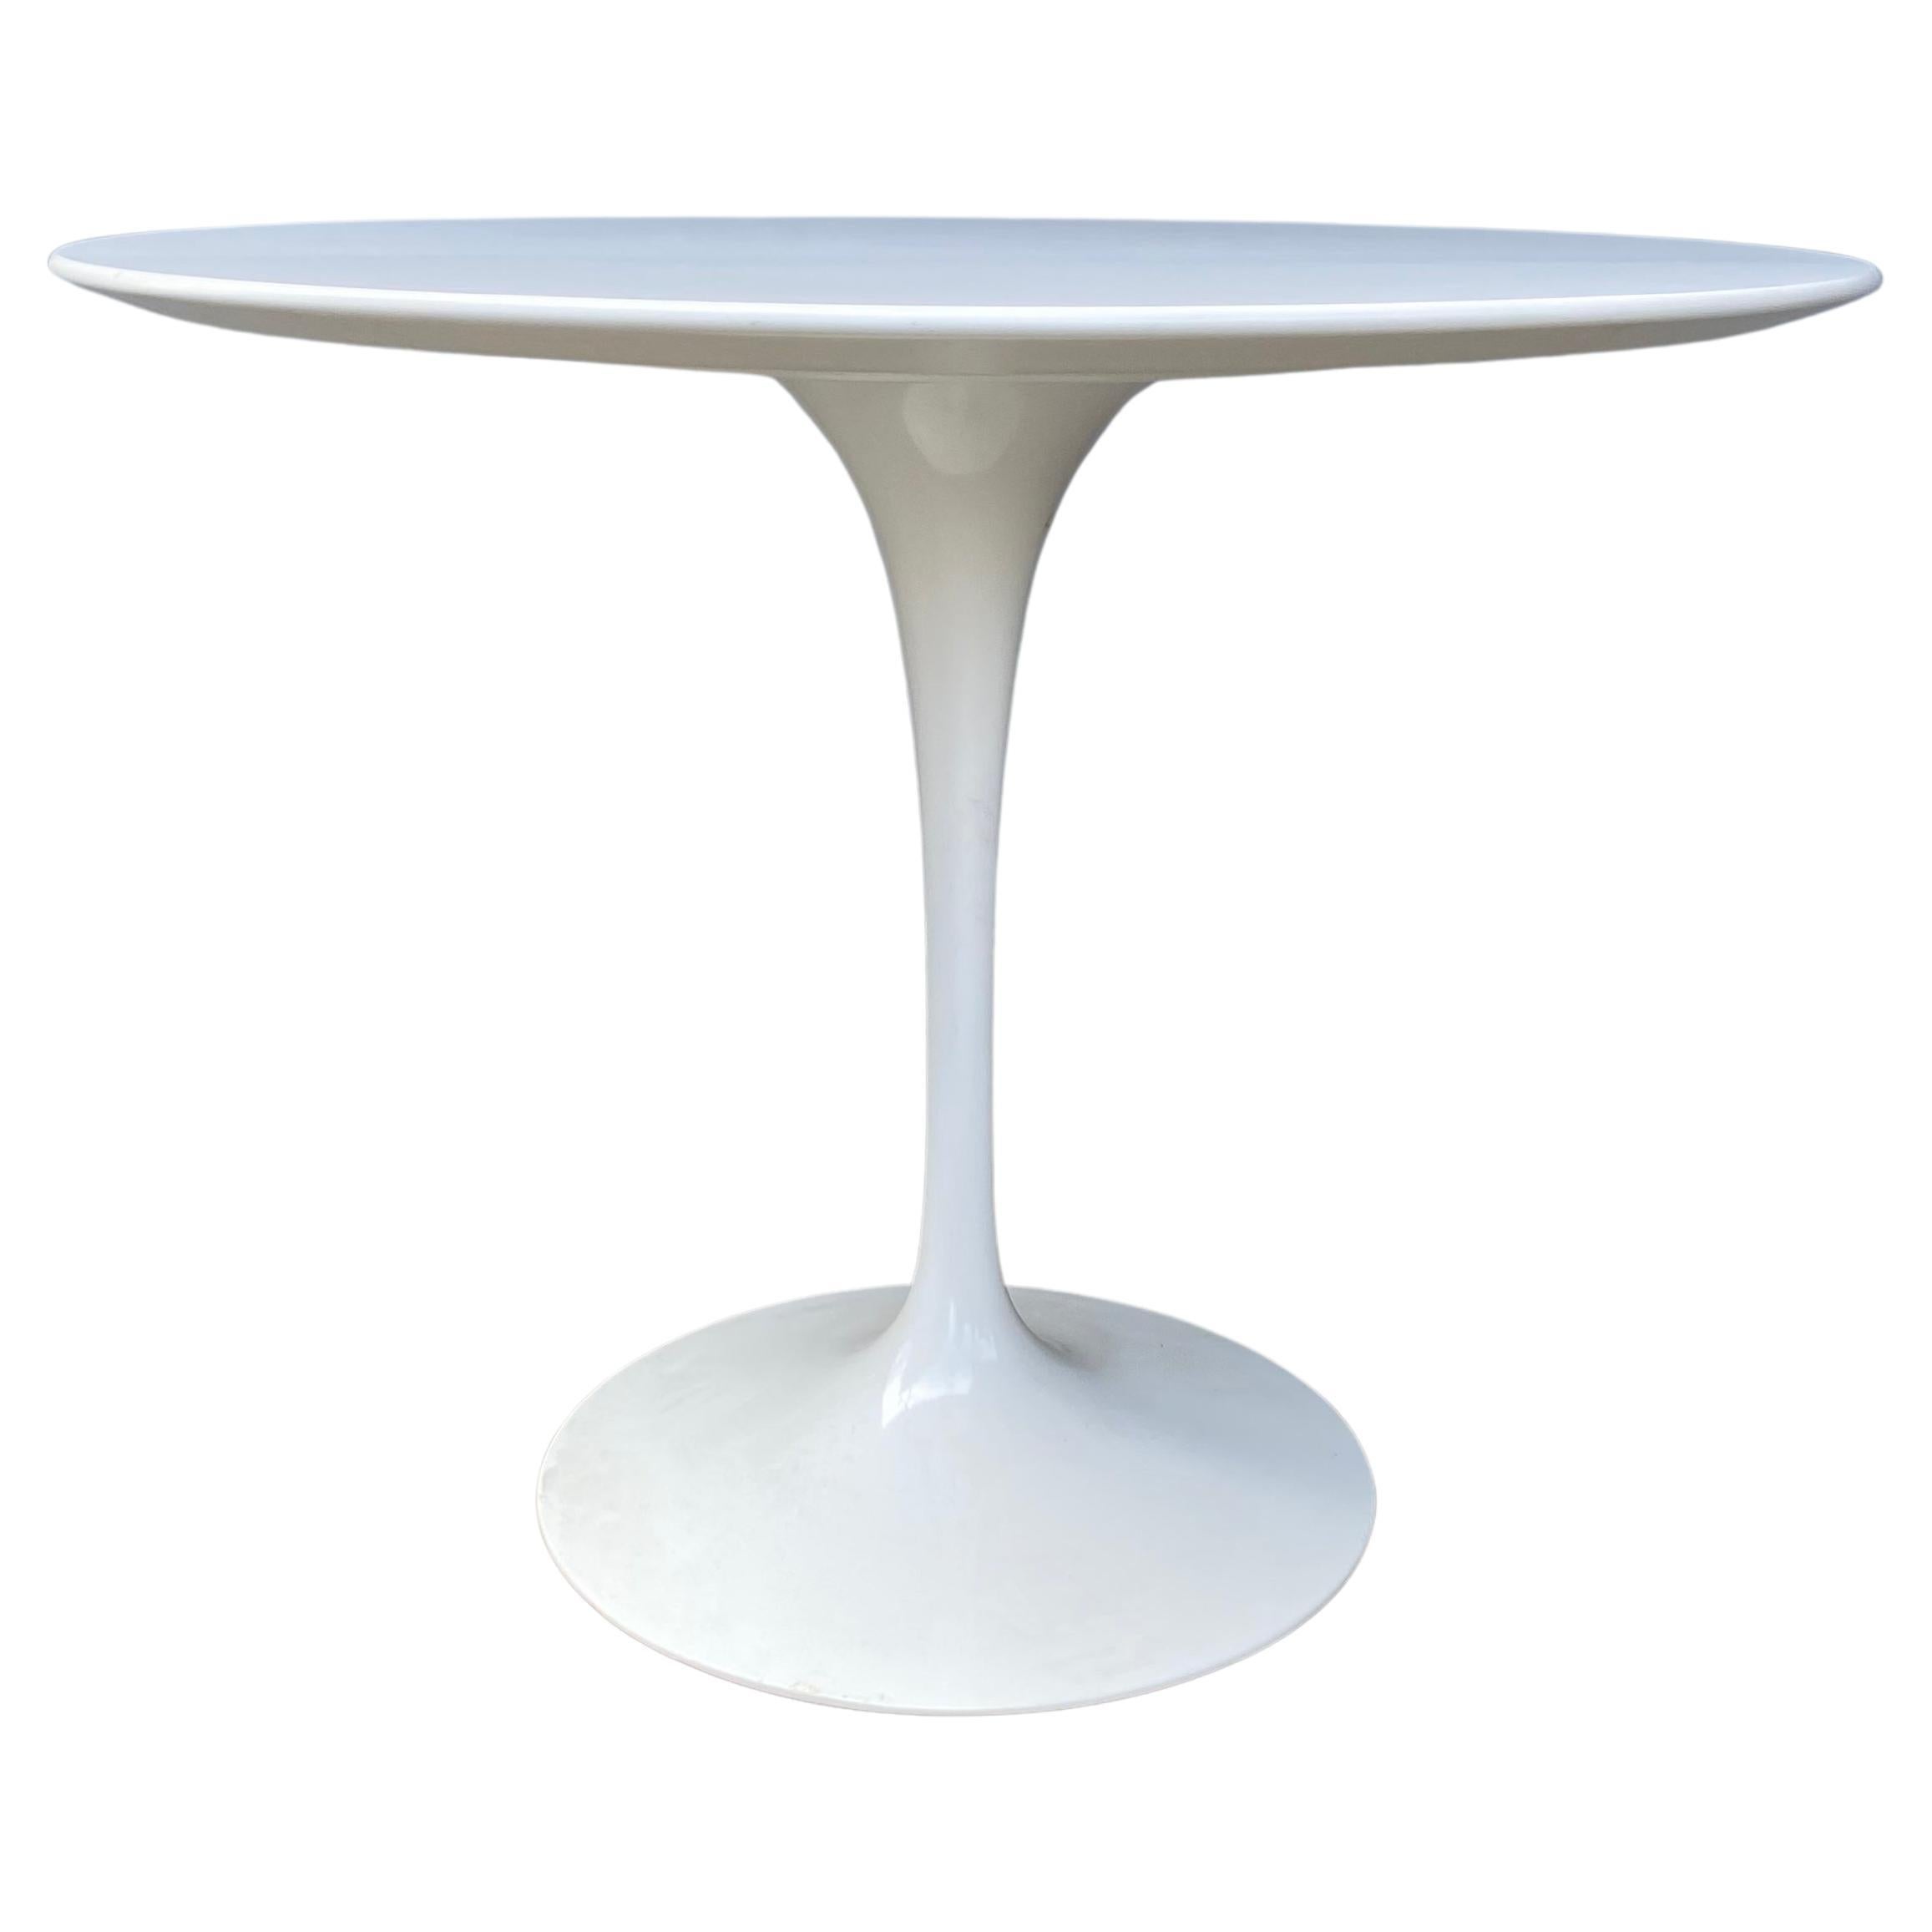 Classic Modernist Tulip Table Designed by Eero Saarinen for Knoll, Italy